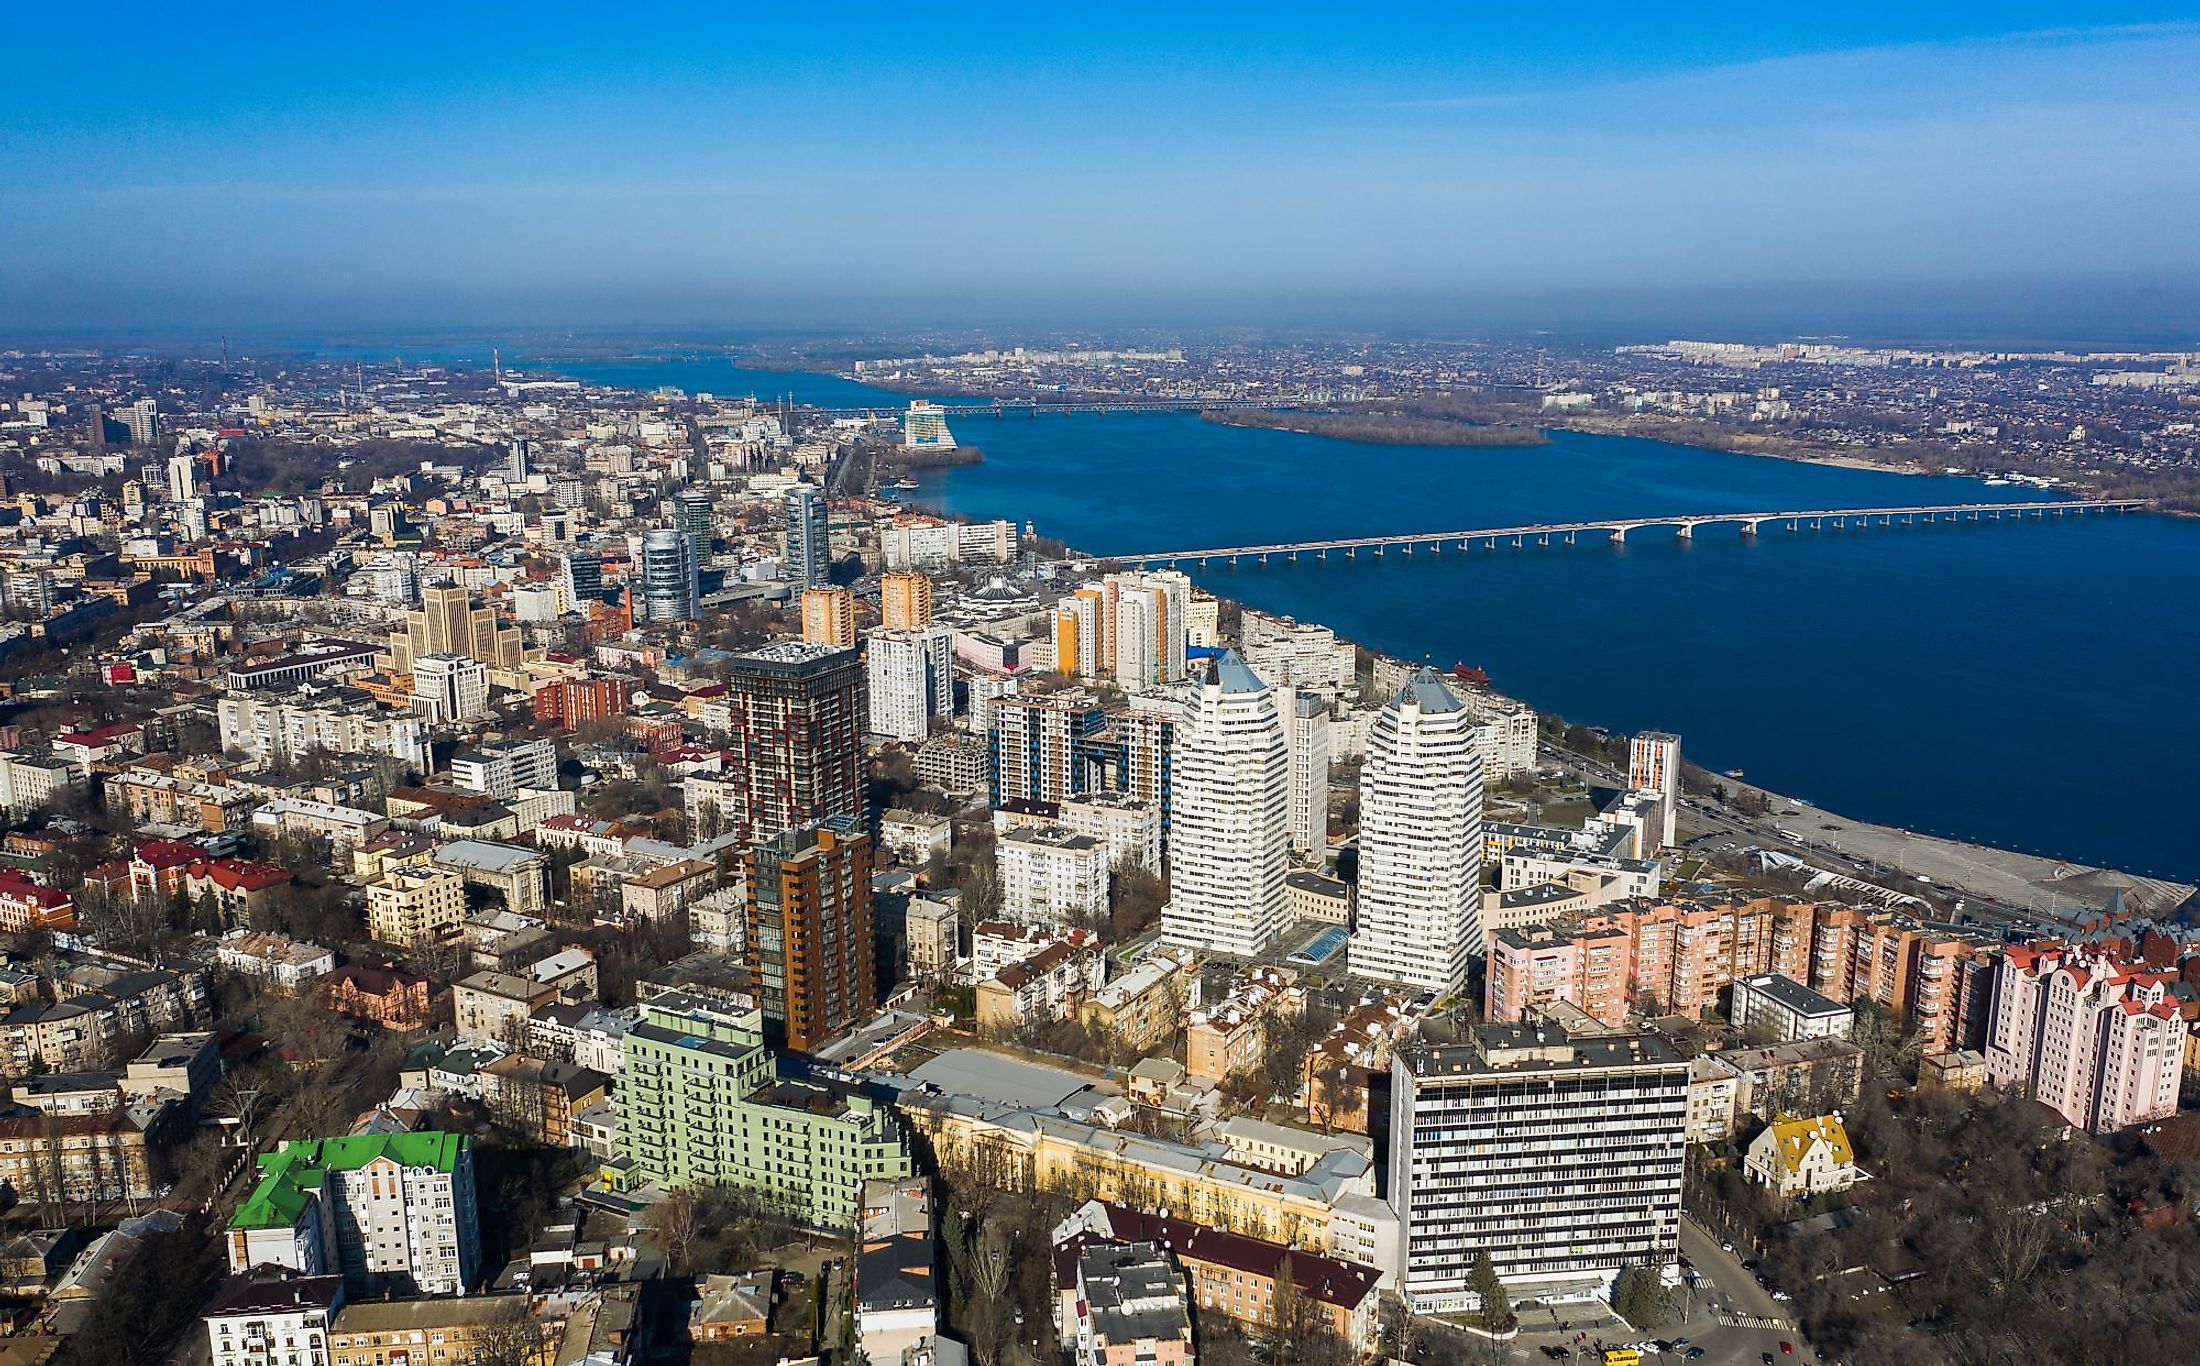 Aerial view of Dnipro city with the Dnieper River and different building blocks. 